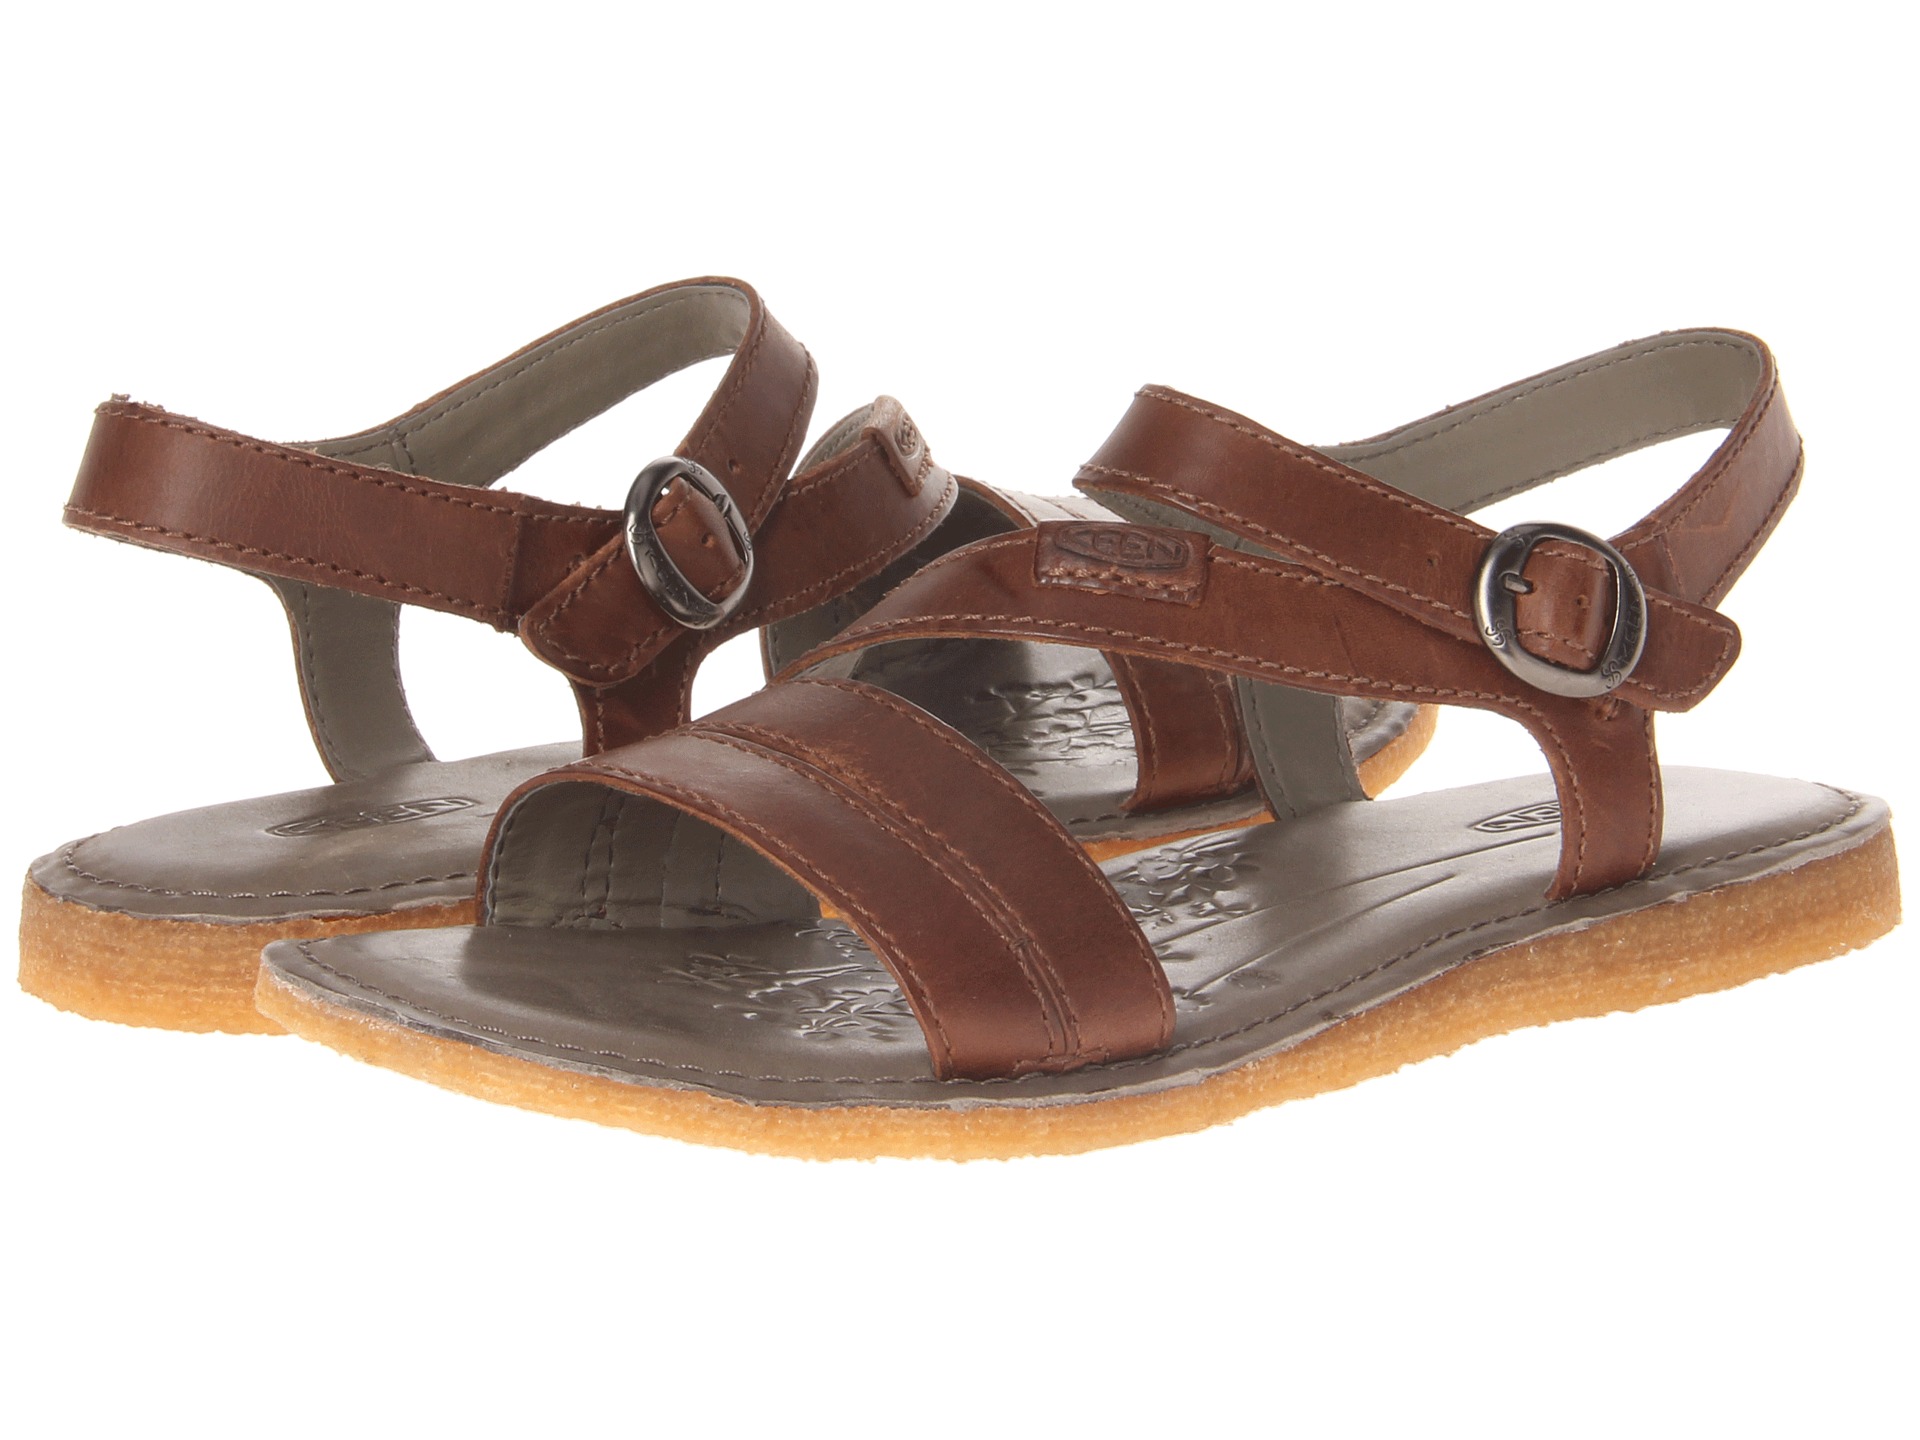 No results for keen sierra sandal - Search Zappos